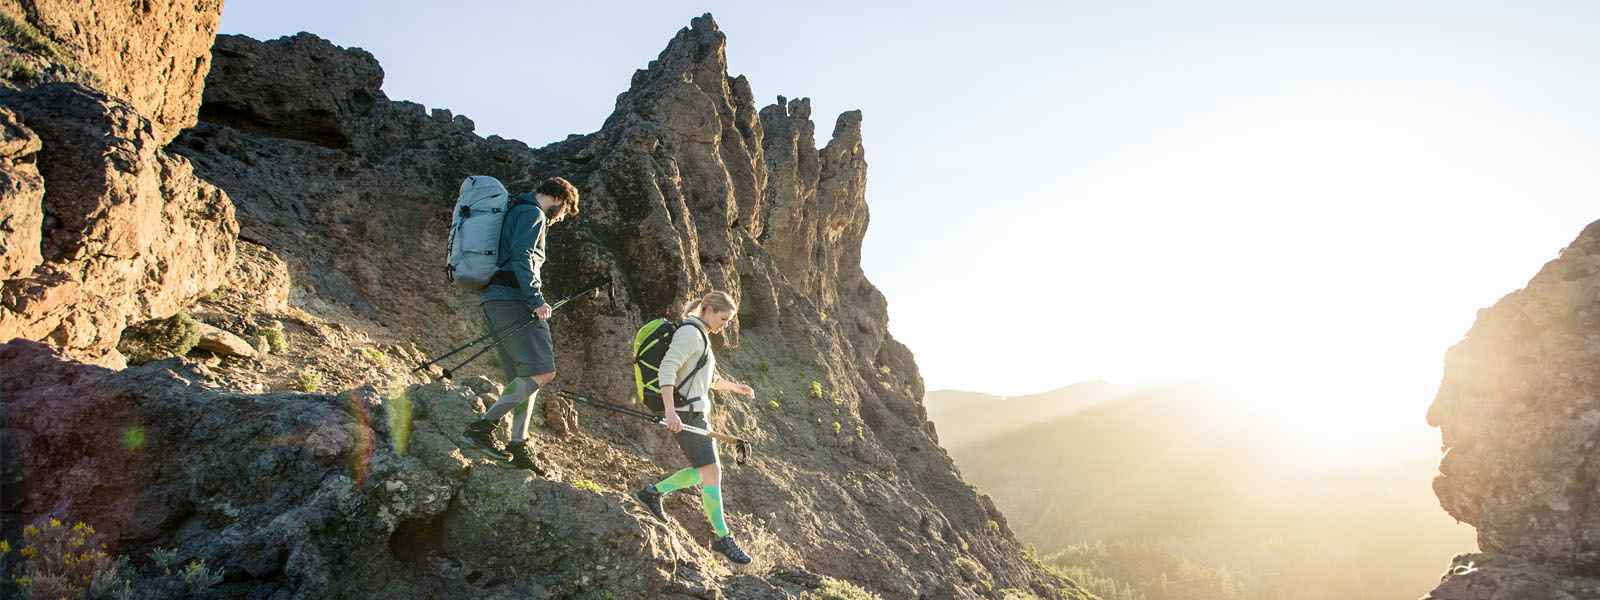 Two hikers with long hiking socks go down a steep path on a mountain at dusk